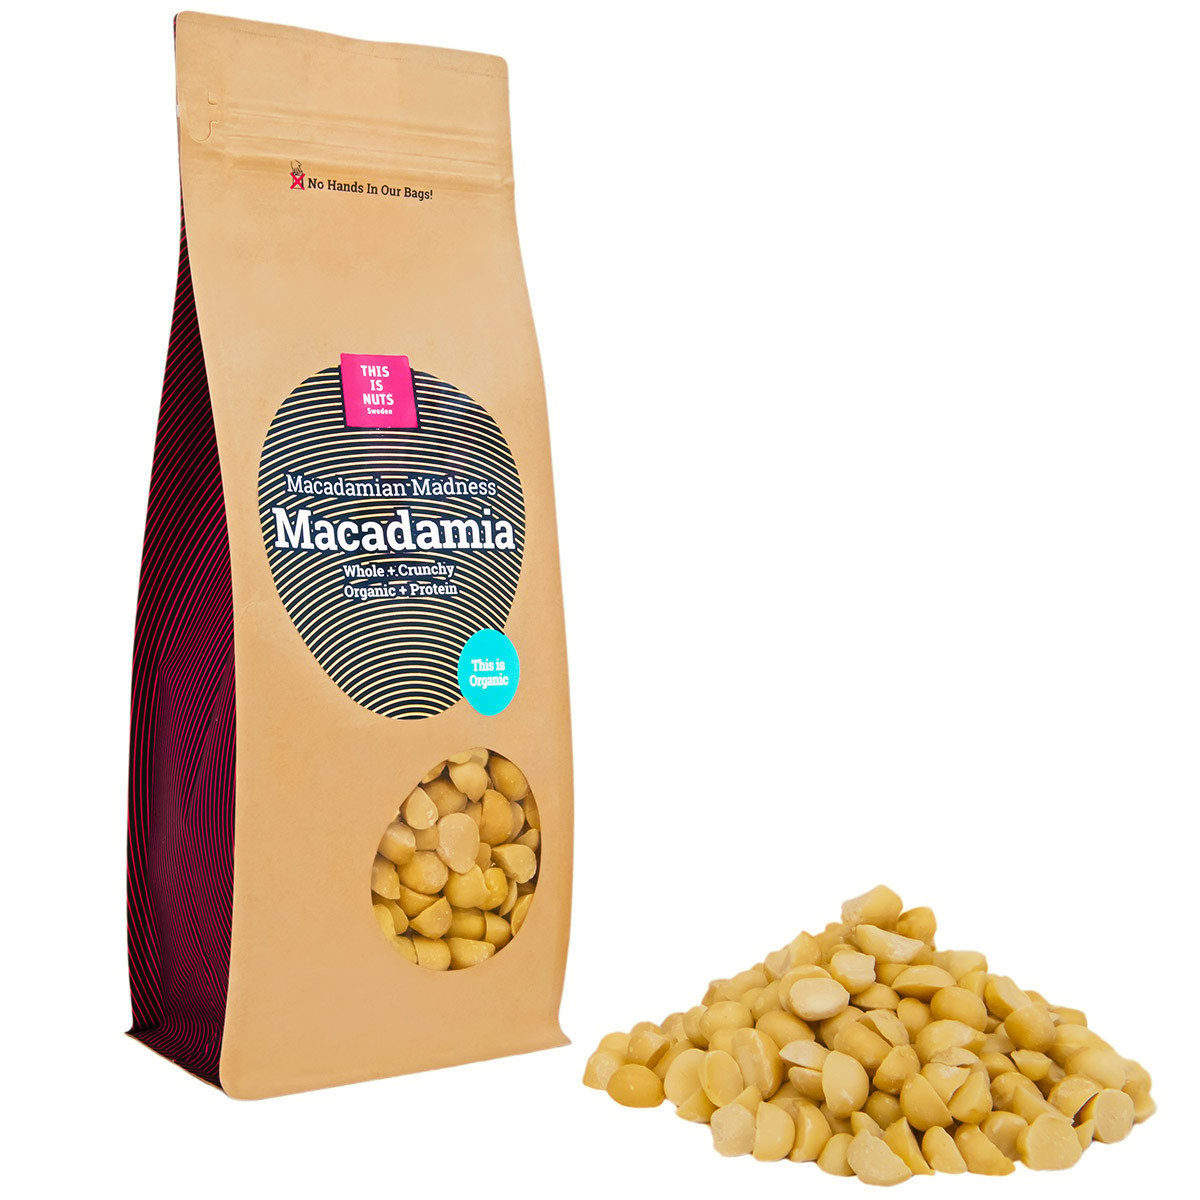 This is nuts Sweden Macadamian Madness Macadamia 300g